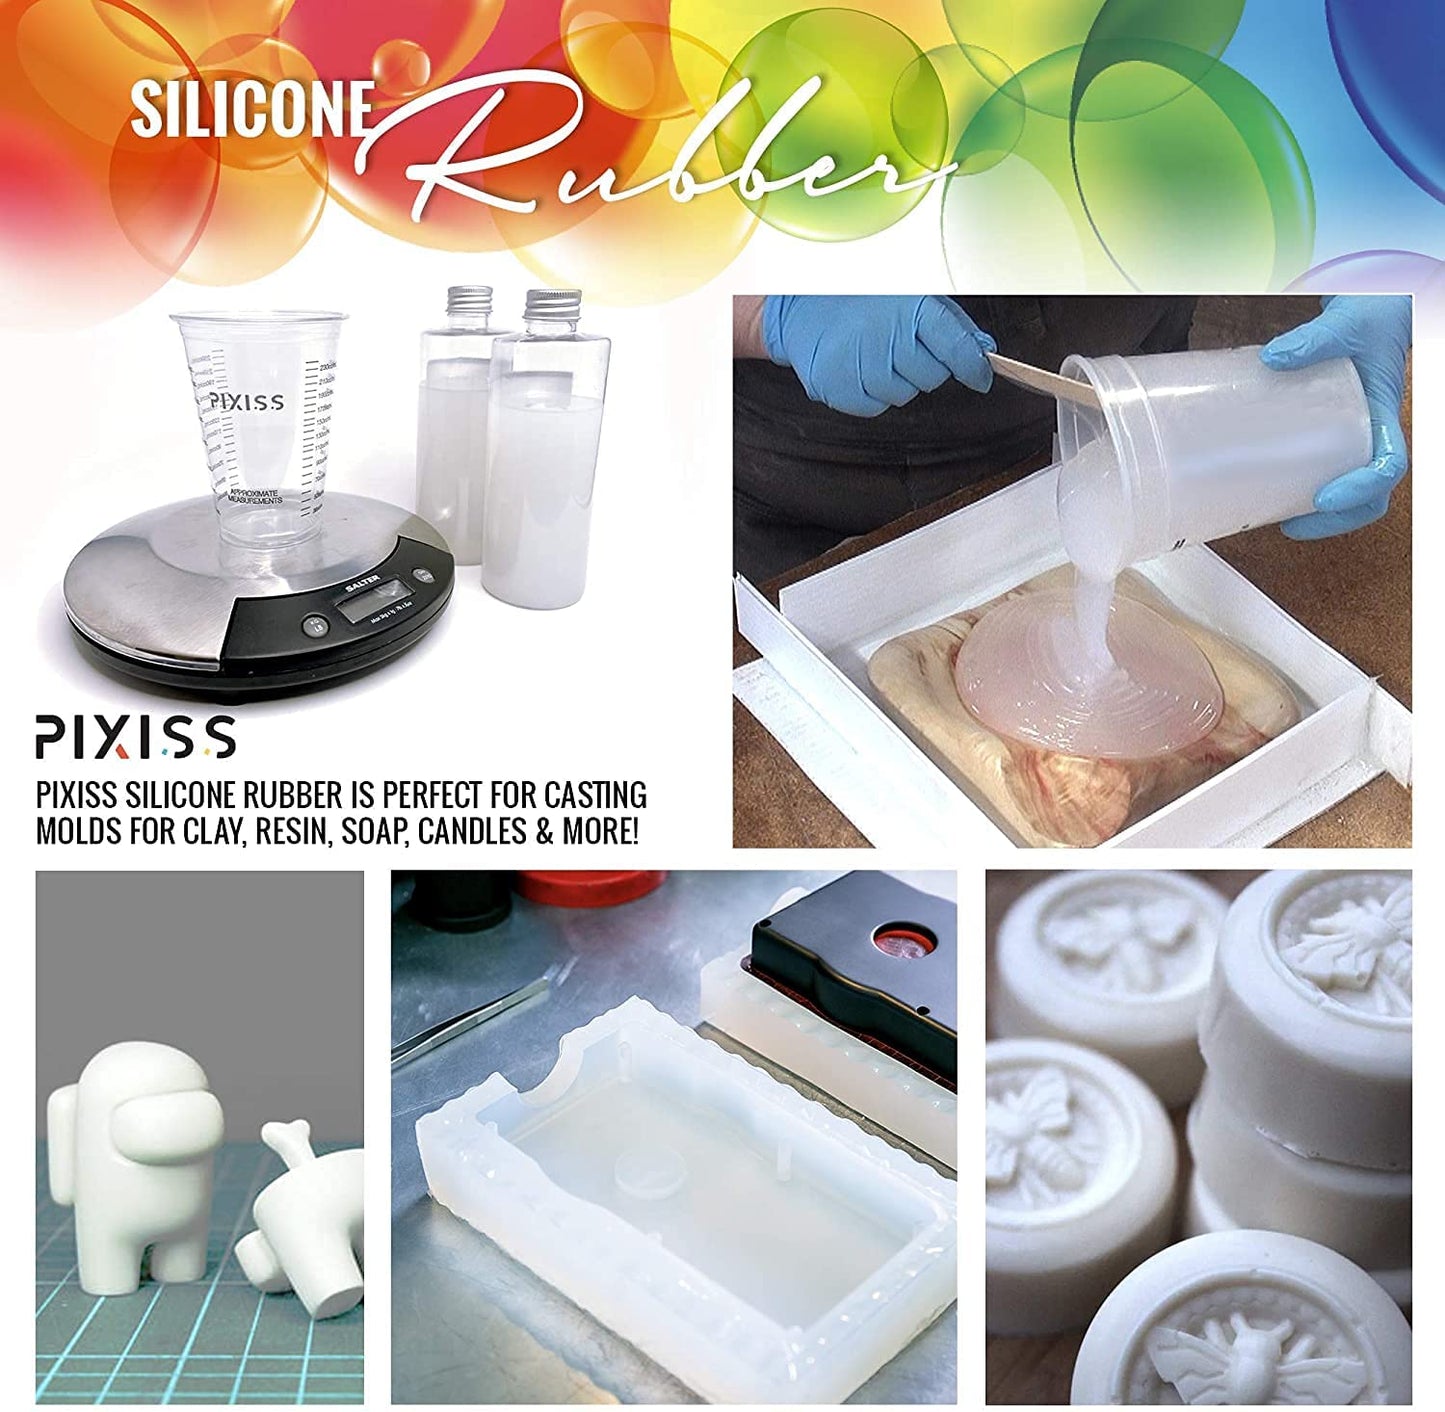 PIXISS Liquid Silicone Rubber for Mold Making 7 oz Kit by Pixiss